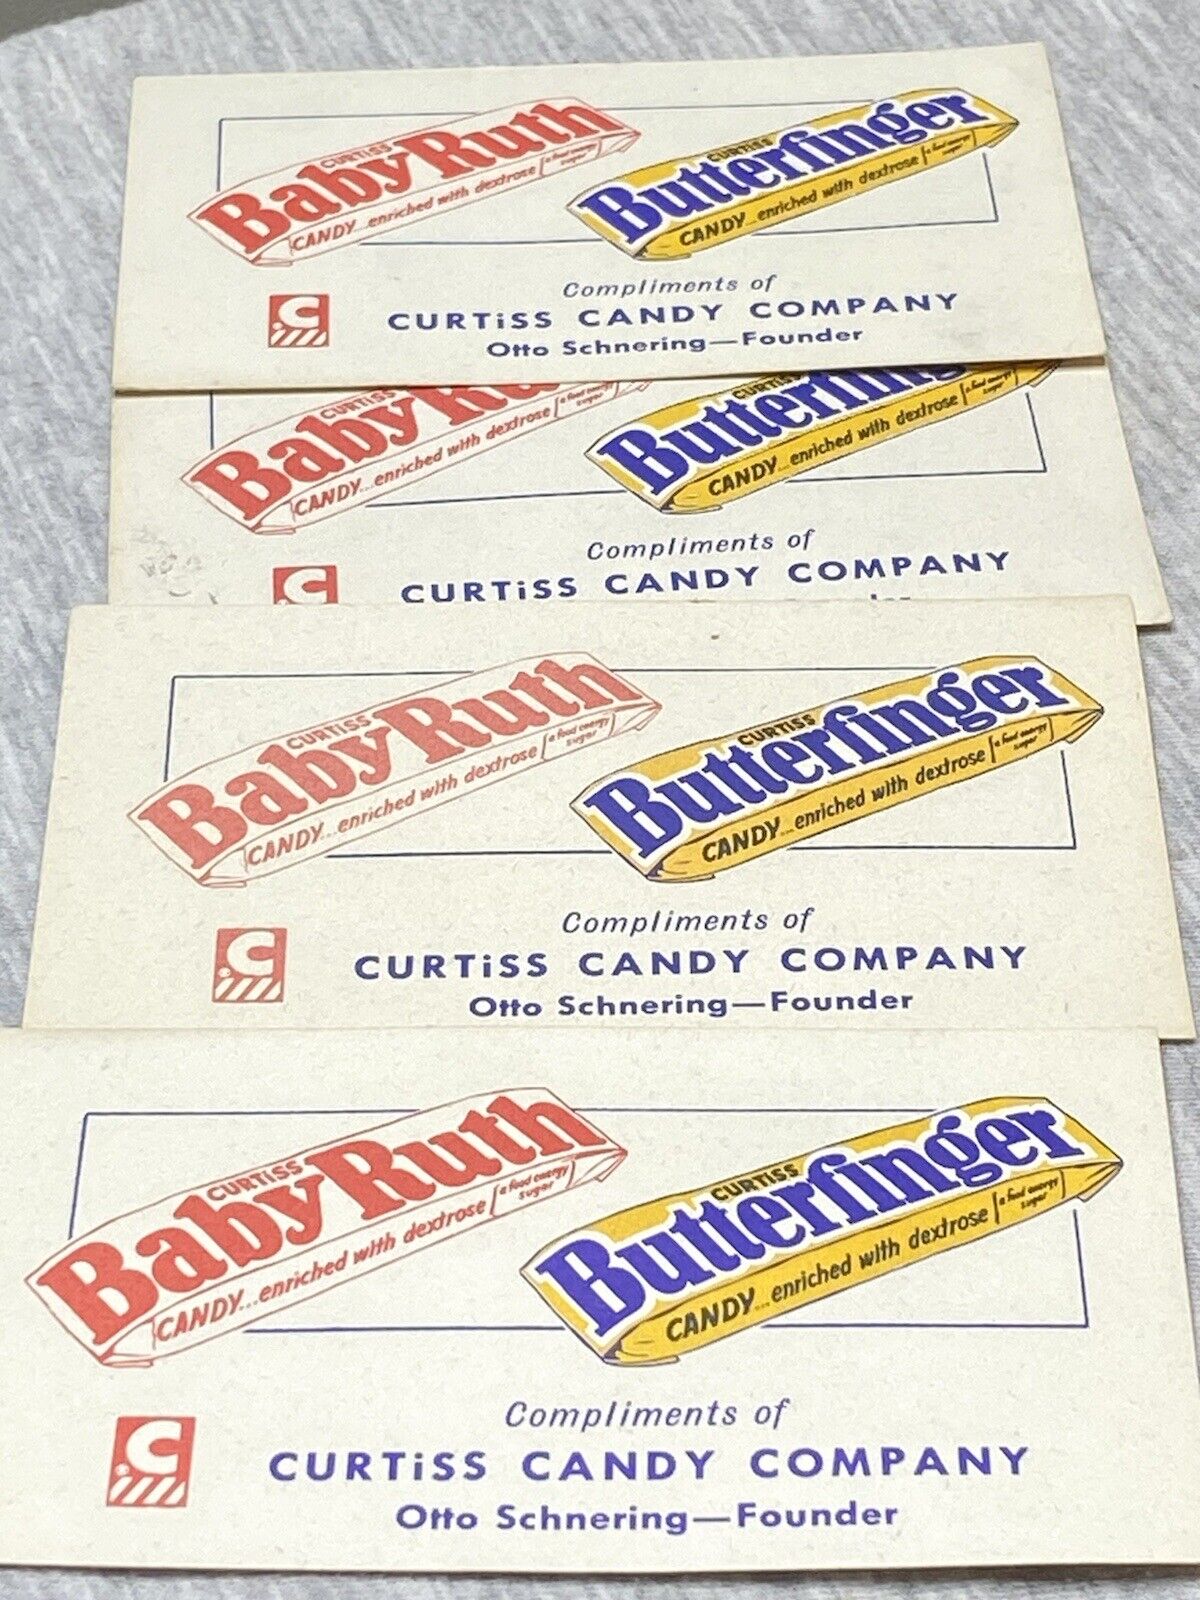 4 Vintage Baby Ruth Butterfinger Curtiss Candy Company Cards Pledge Allegiance ￼